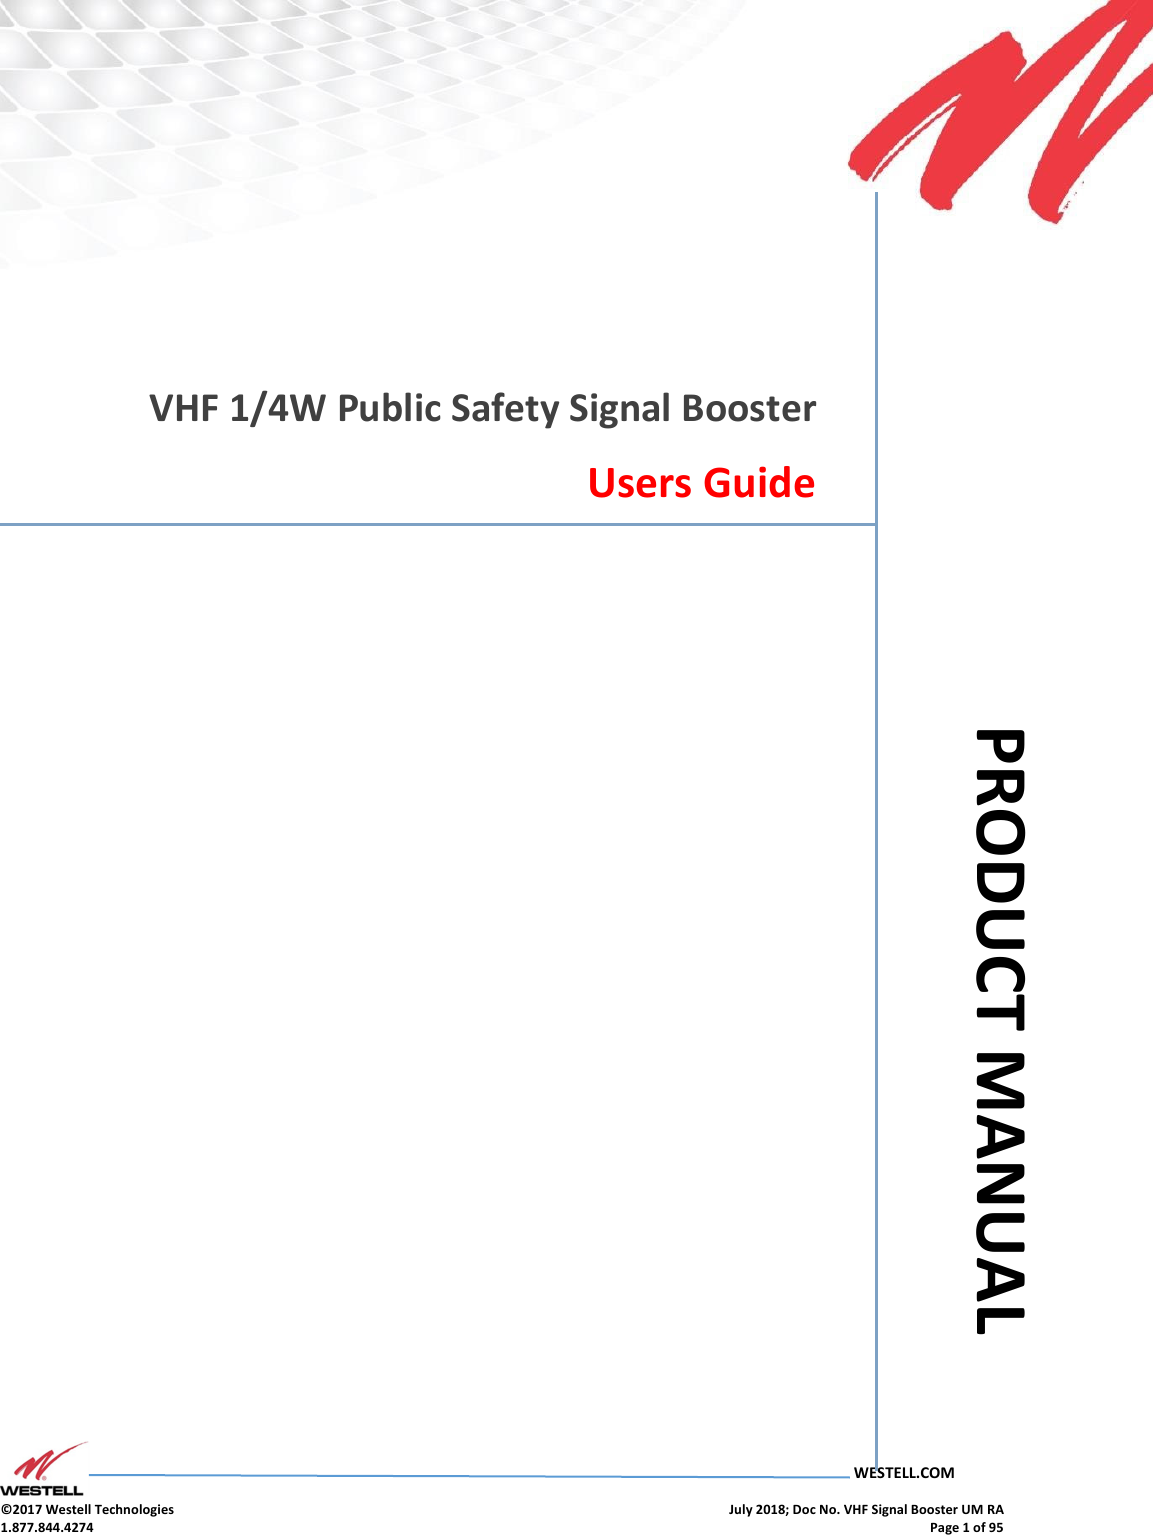 VHF Product Manual July 2018, Rev B   WESTELL.COM  ©2017 Westell Technologies    July 2018; Doc No. VHF Signal Booster UM RA 1.877.844.4274    Page 1 of 95  5689     VHF 1/4W Public Safety Signal Booster Users Guide             PRODUCT MANUAL 